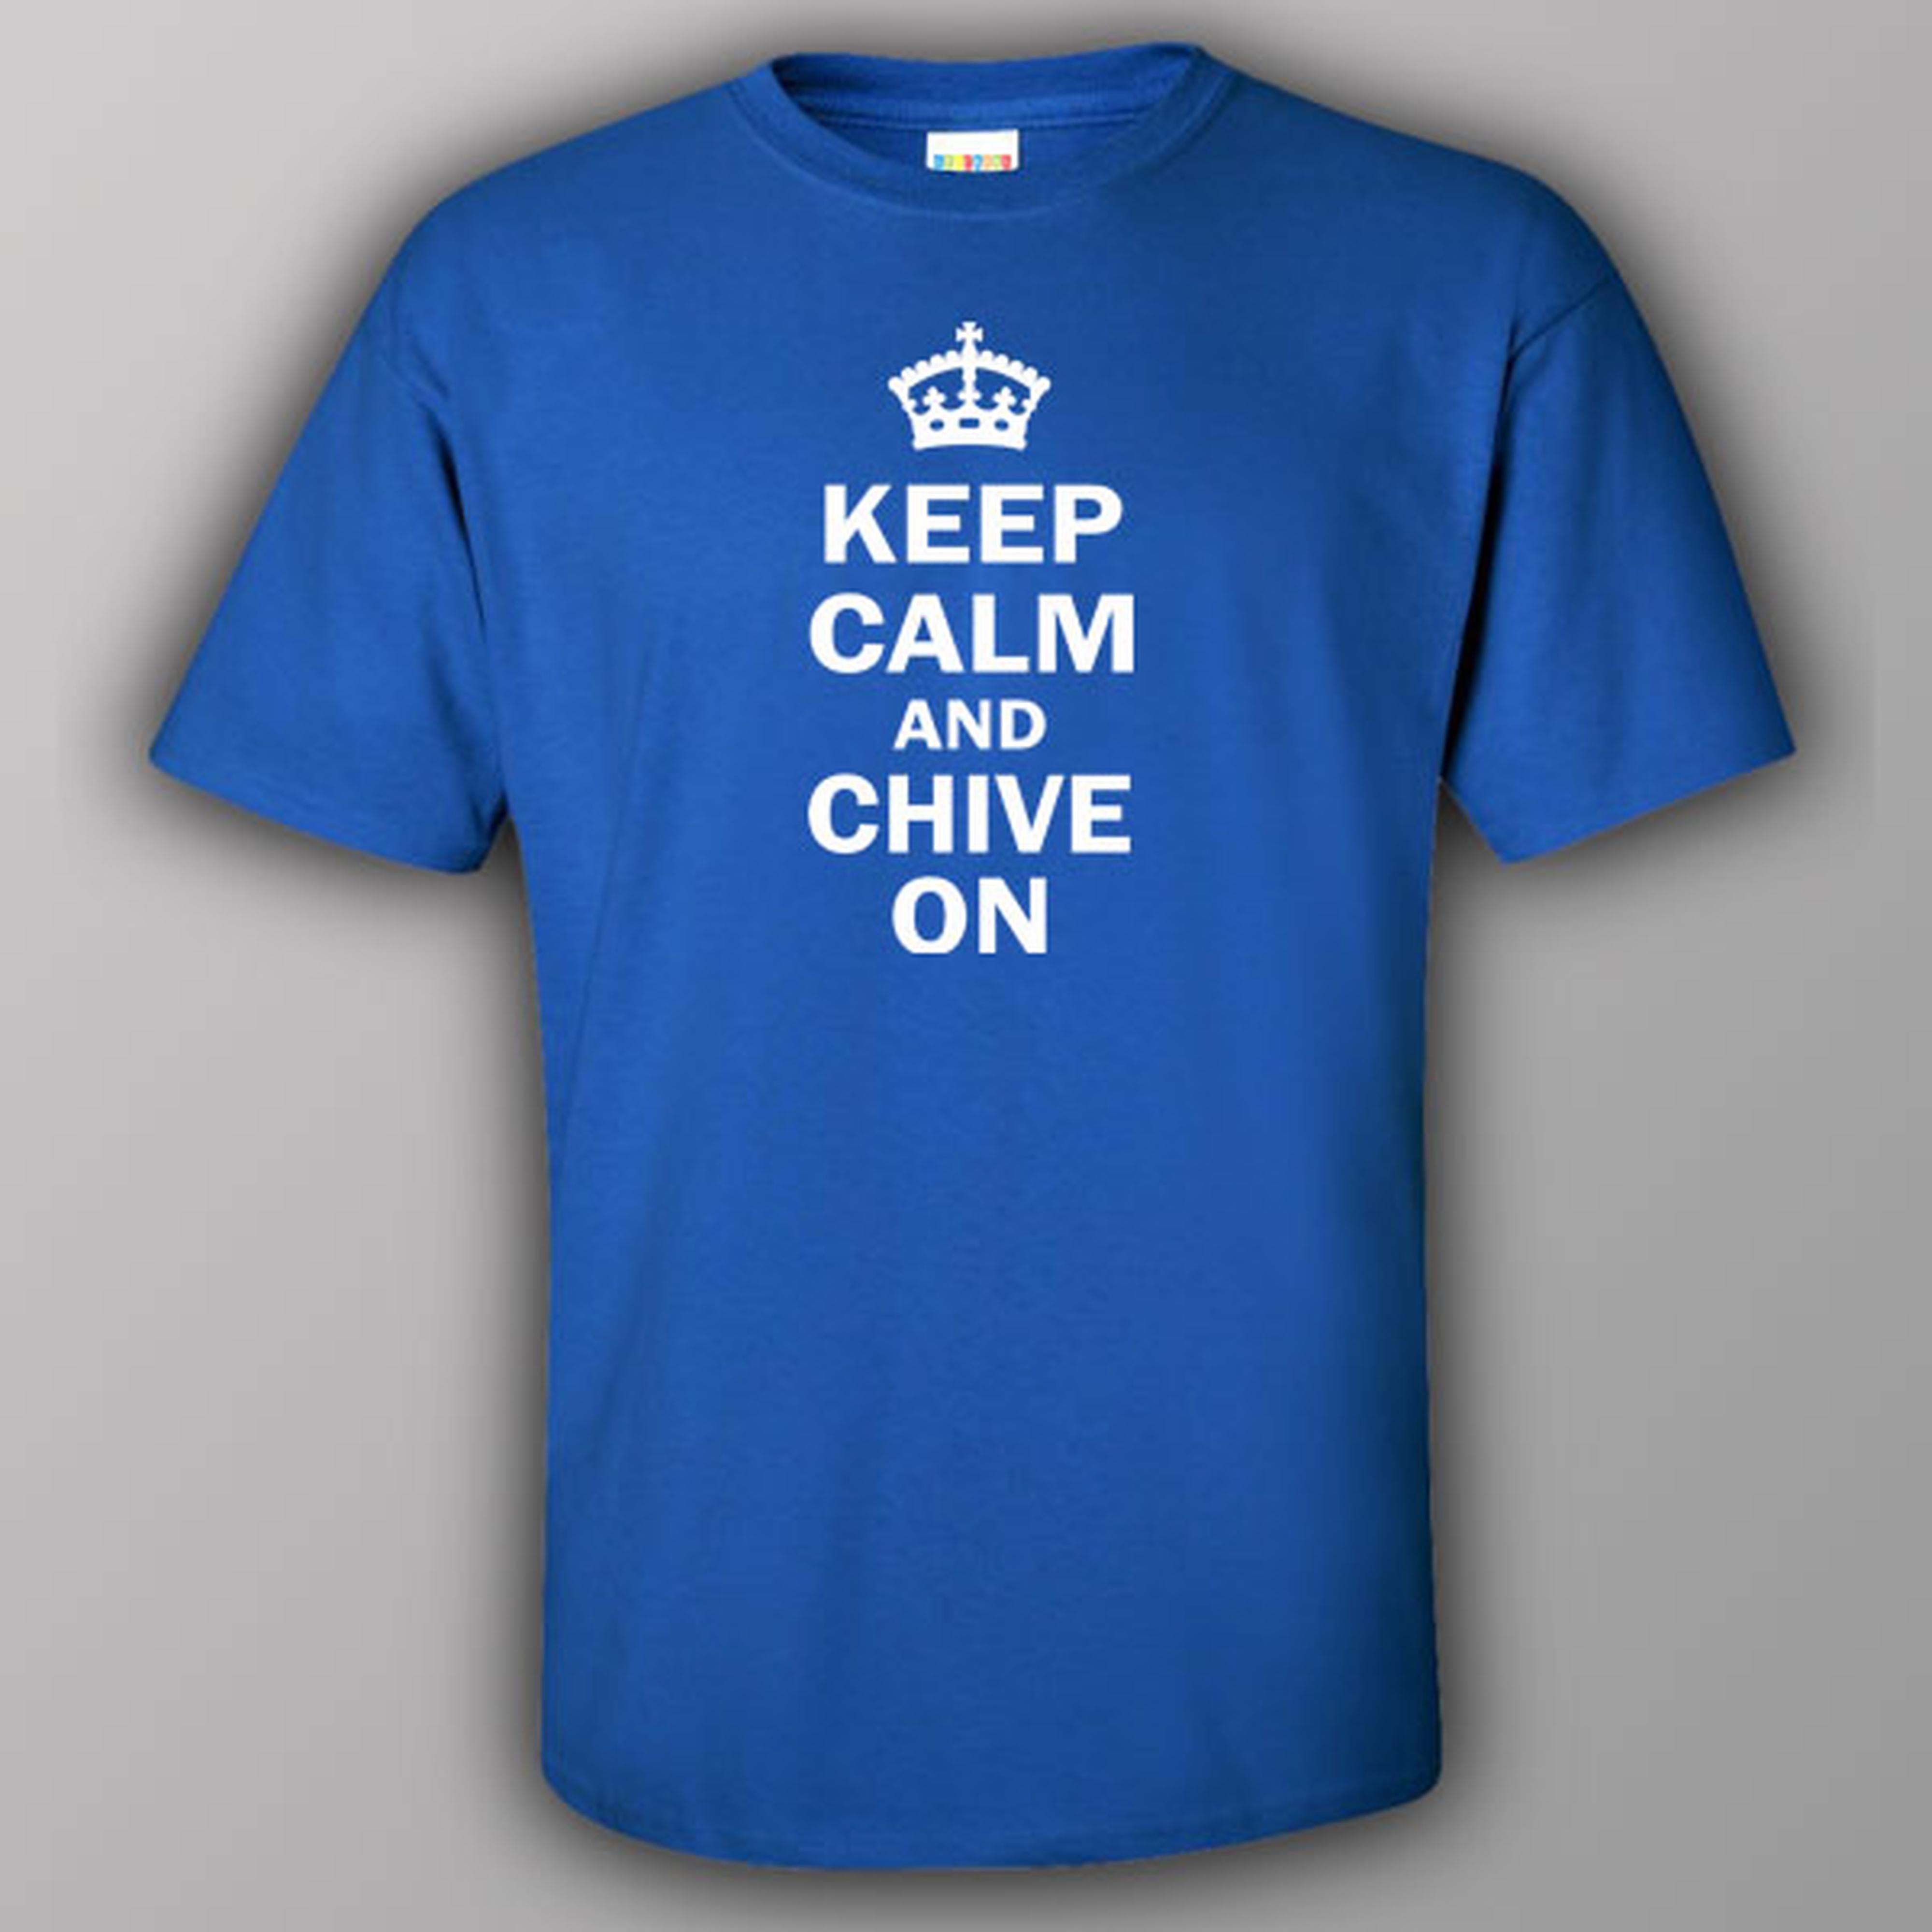 Keep calm and chive on - T-shirt